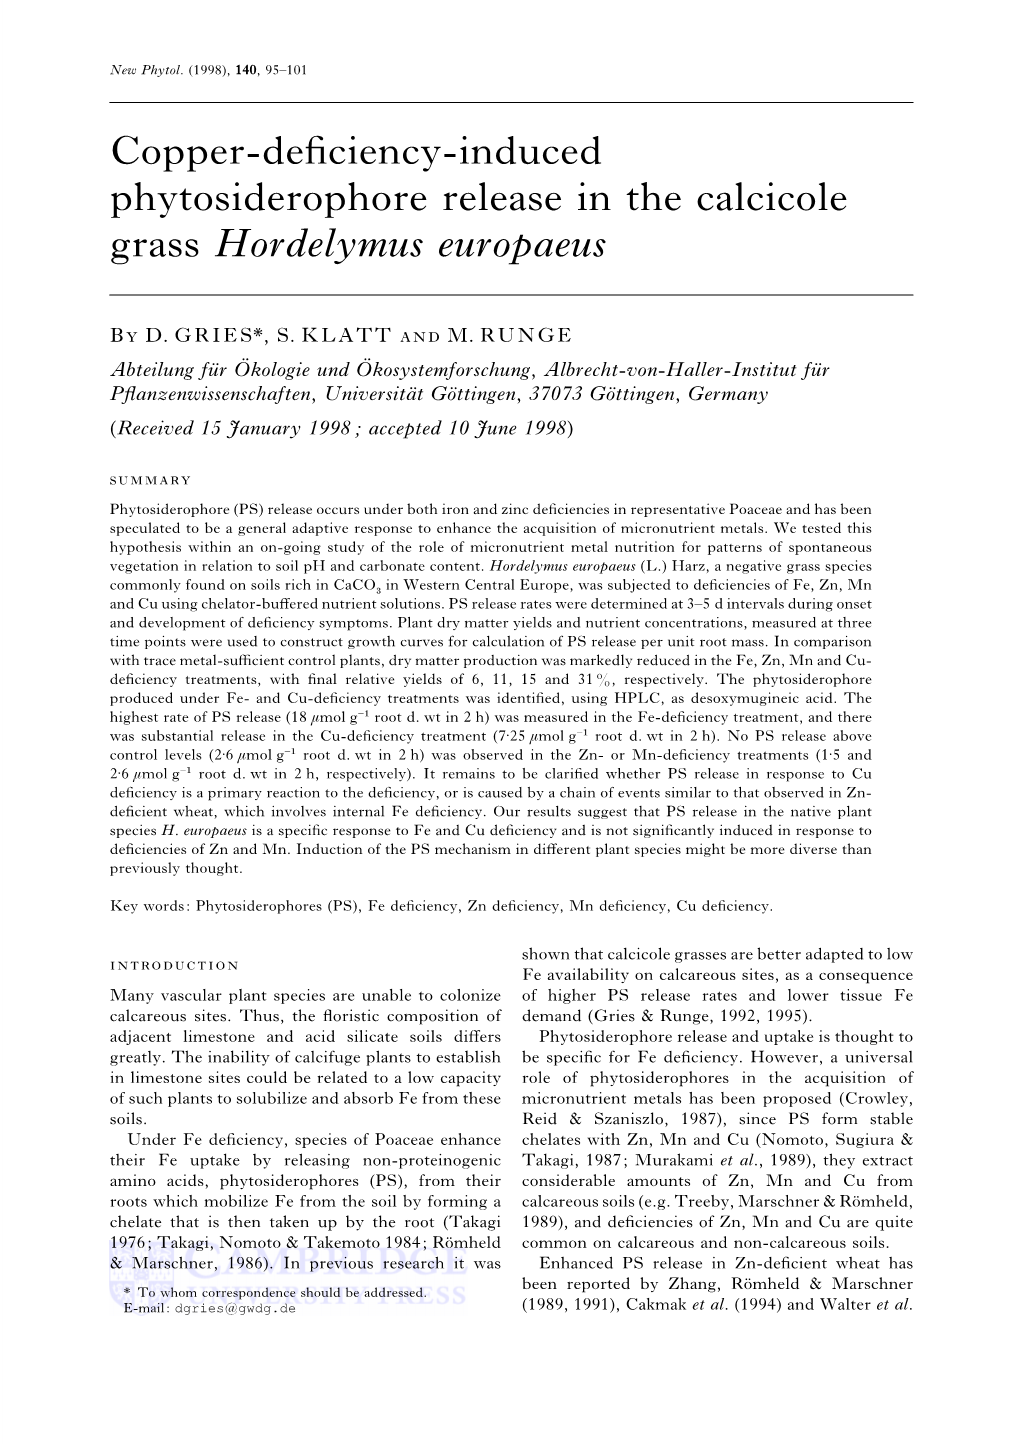 Copper-Deficiency-Induced Phytosiderophore Release in in the Calcicole Grass Hordelymus Europaeus